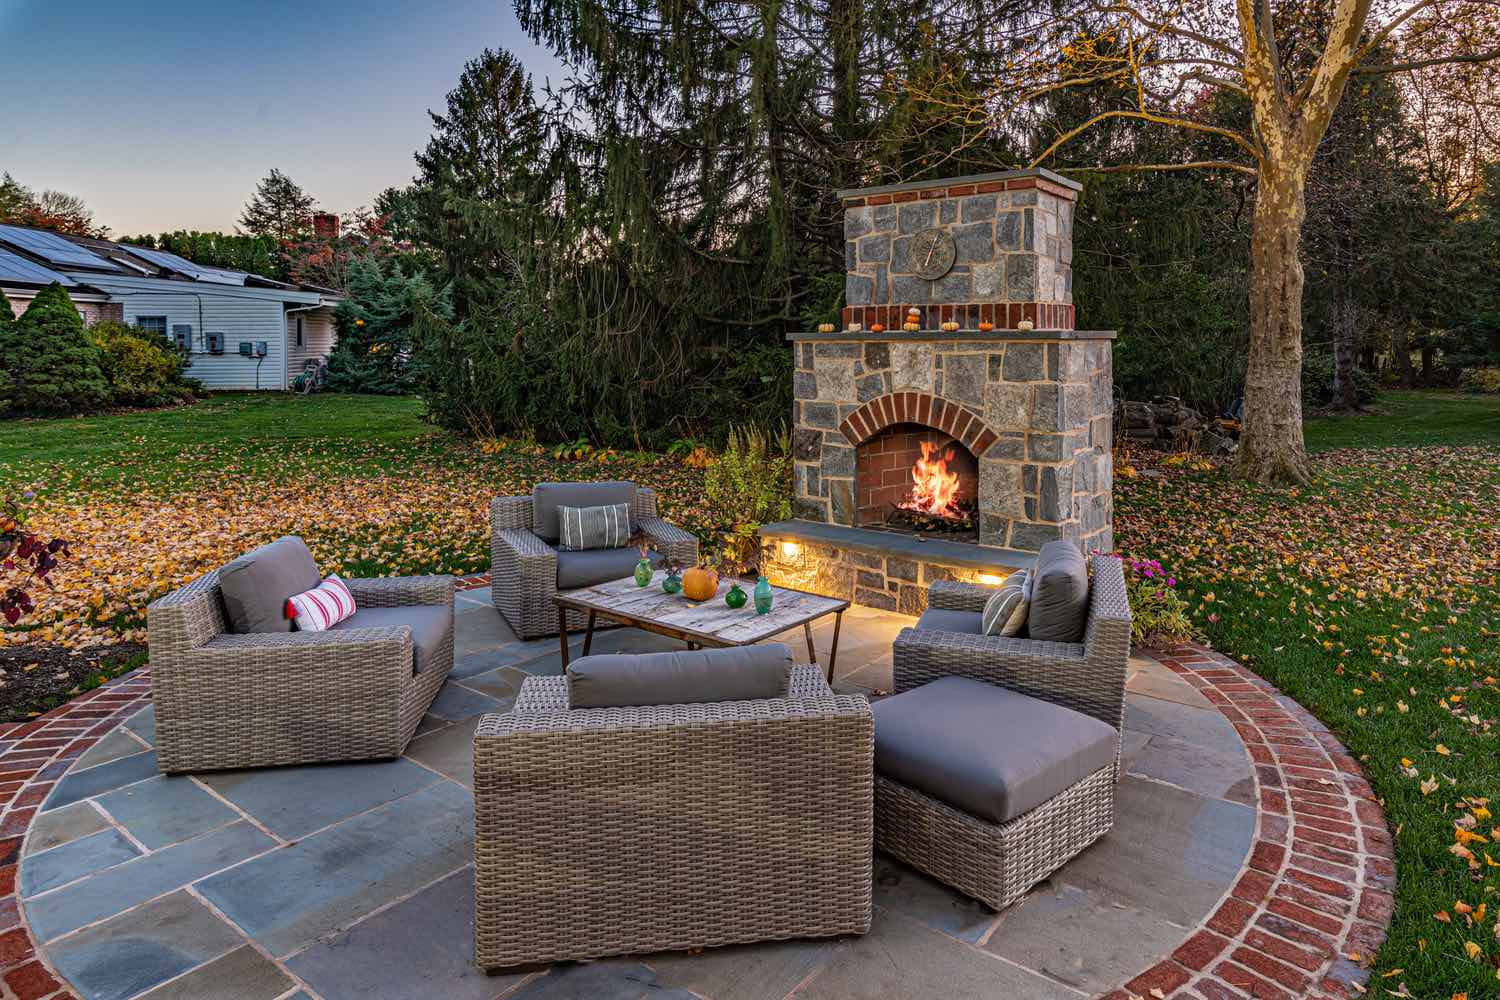 Circular Patio with Stone Fireplace and Seating by First Class Lawn Care